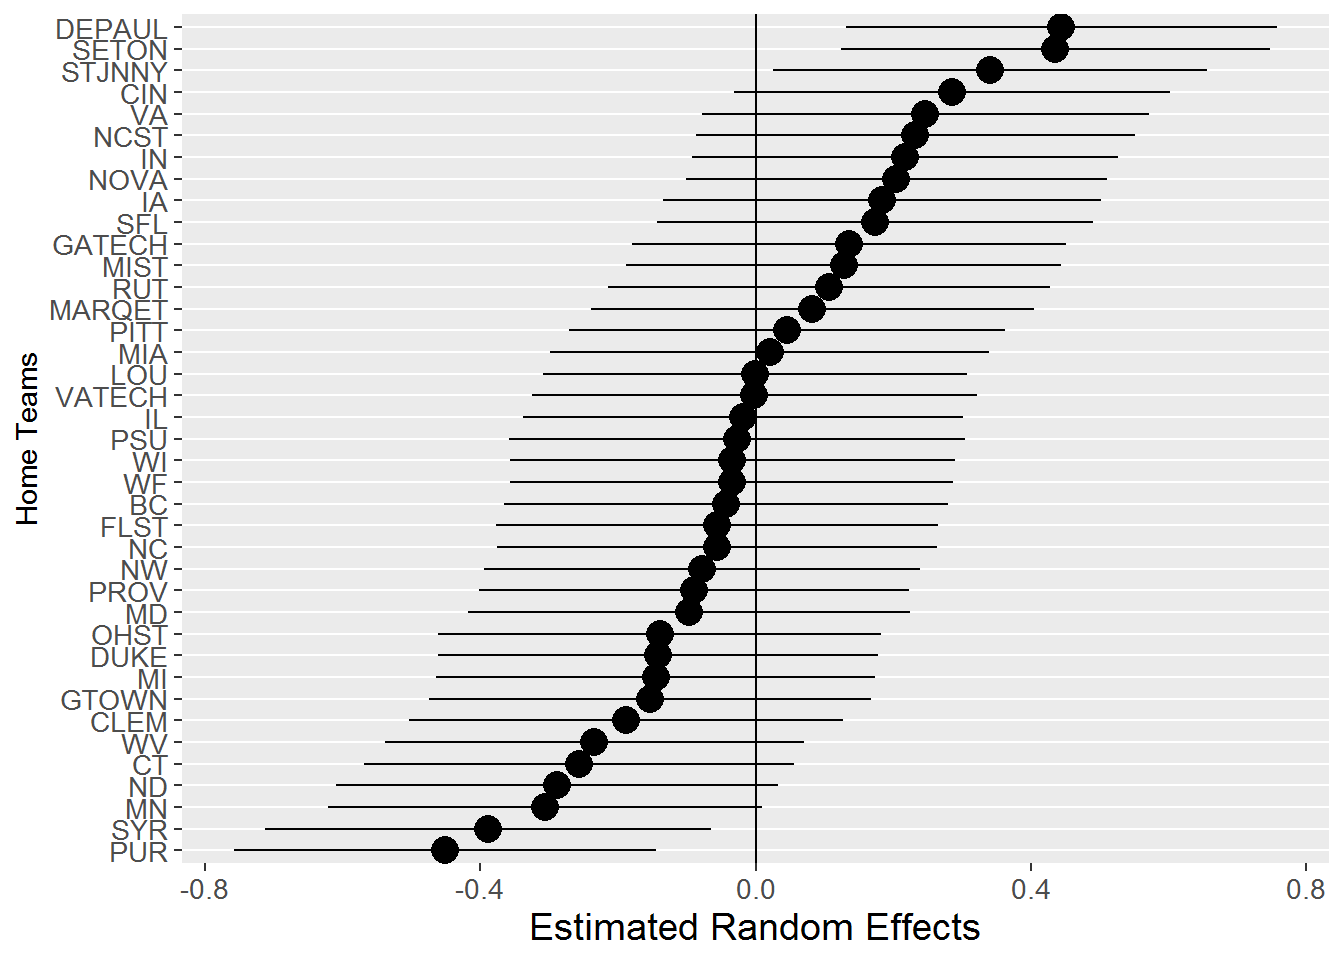 Estimated random effects and associated prediction intervals for 39 home teams in Model F.